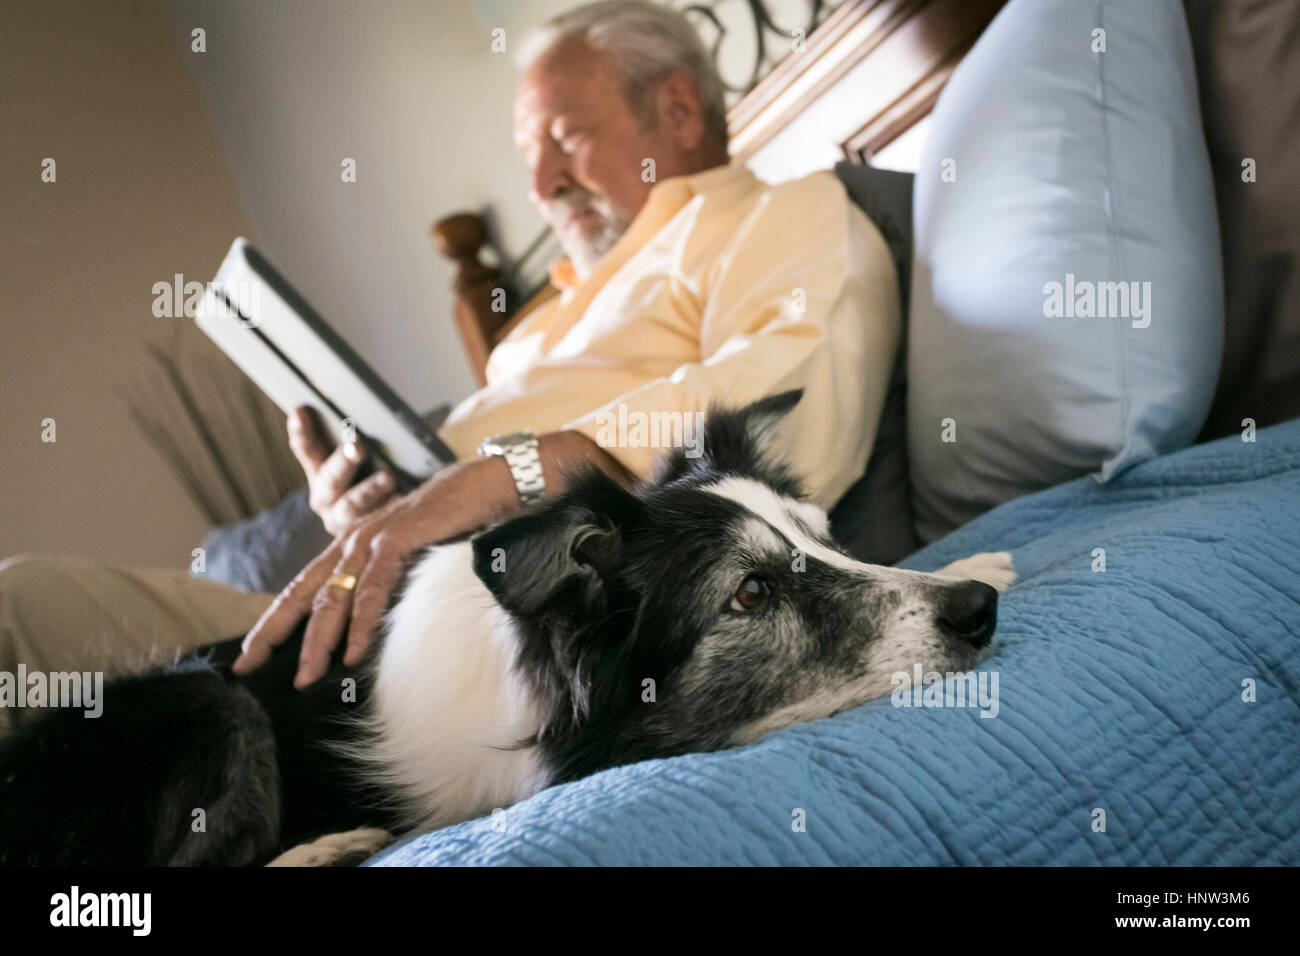 Older man laying on bed with dog reading digital tablet Stock Photo